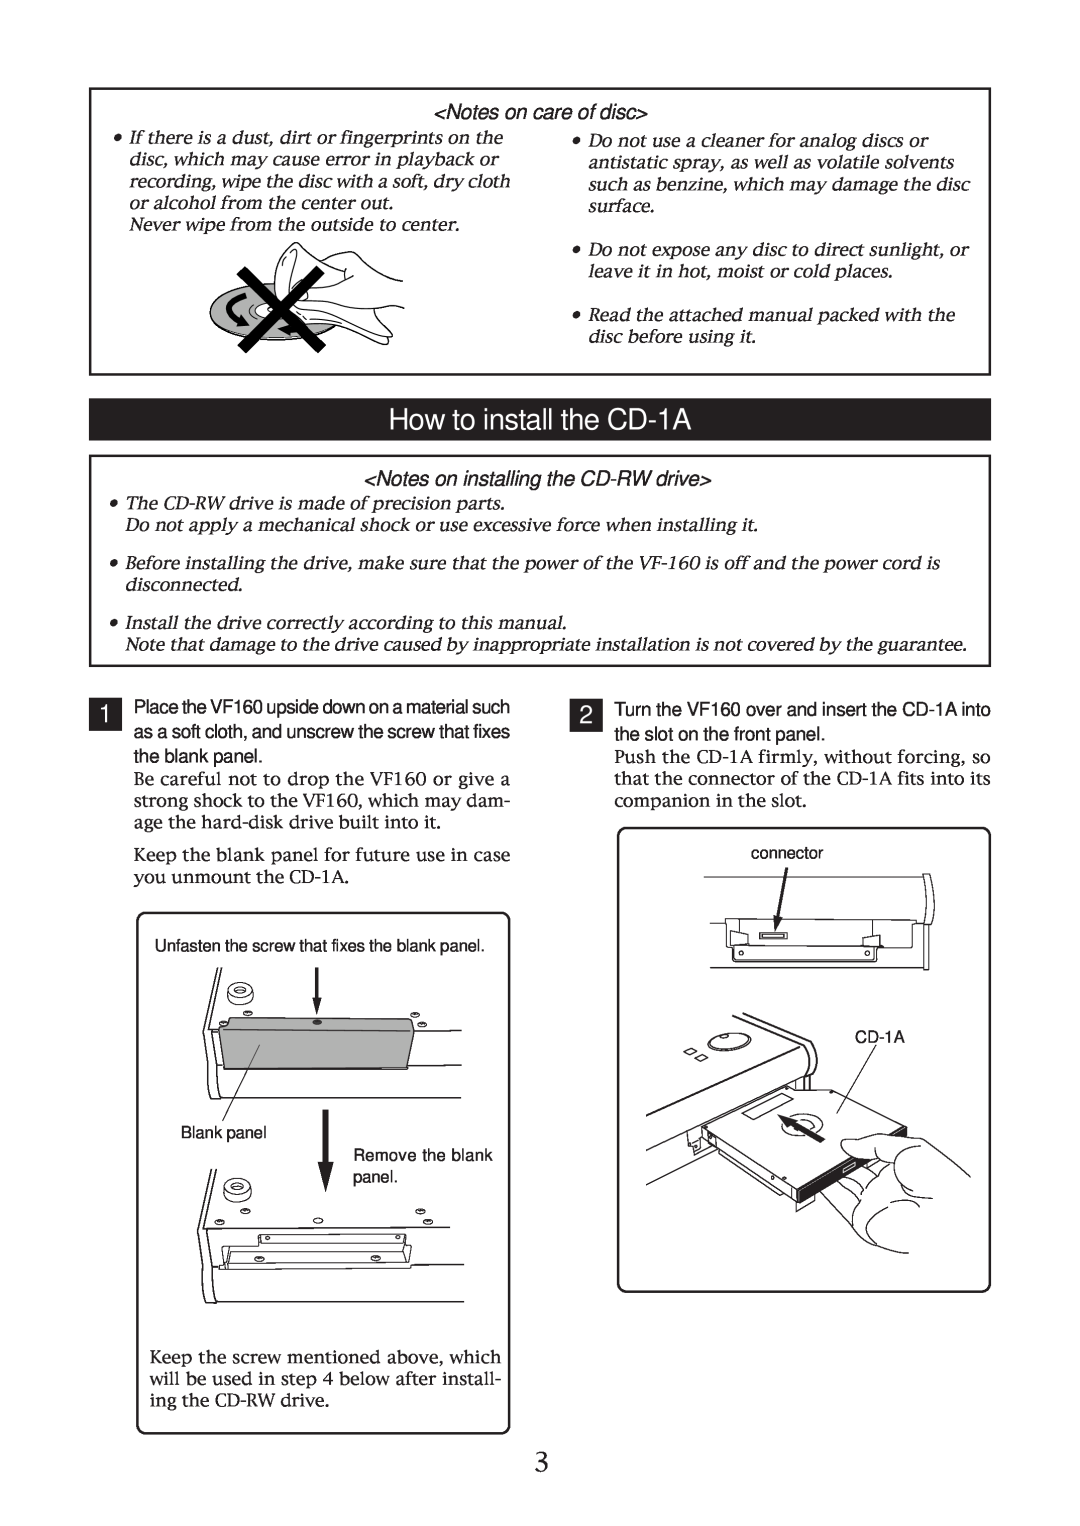 Fostex installation manual How to install the CD-1A, Notes on care of disc, Notes on installing the CD-RW drive 